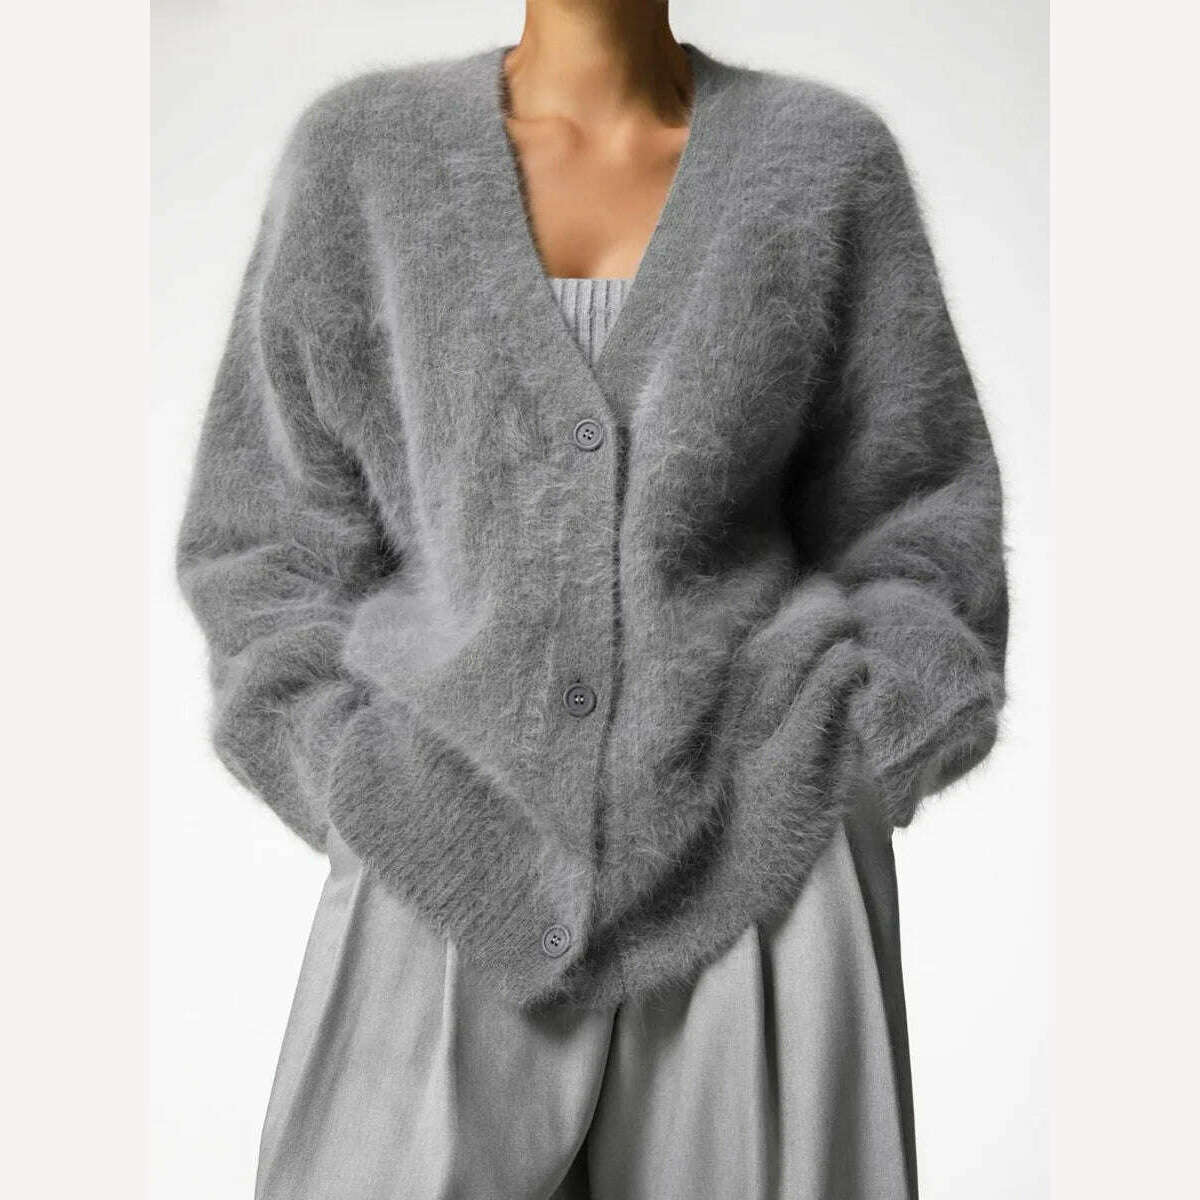 KIMLUD, Fluffy Mohair Cardigan For Women V-Neck Button Up Oversize Cardigan Sweater Autumn Winter Warm Knitted Outerwear, KIMLUD Womens Clothes